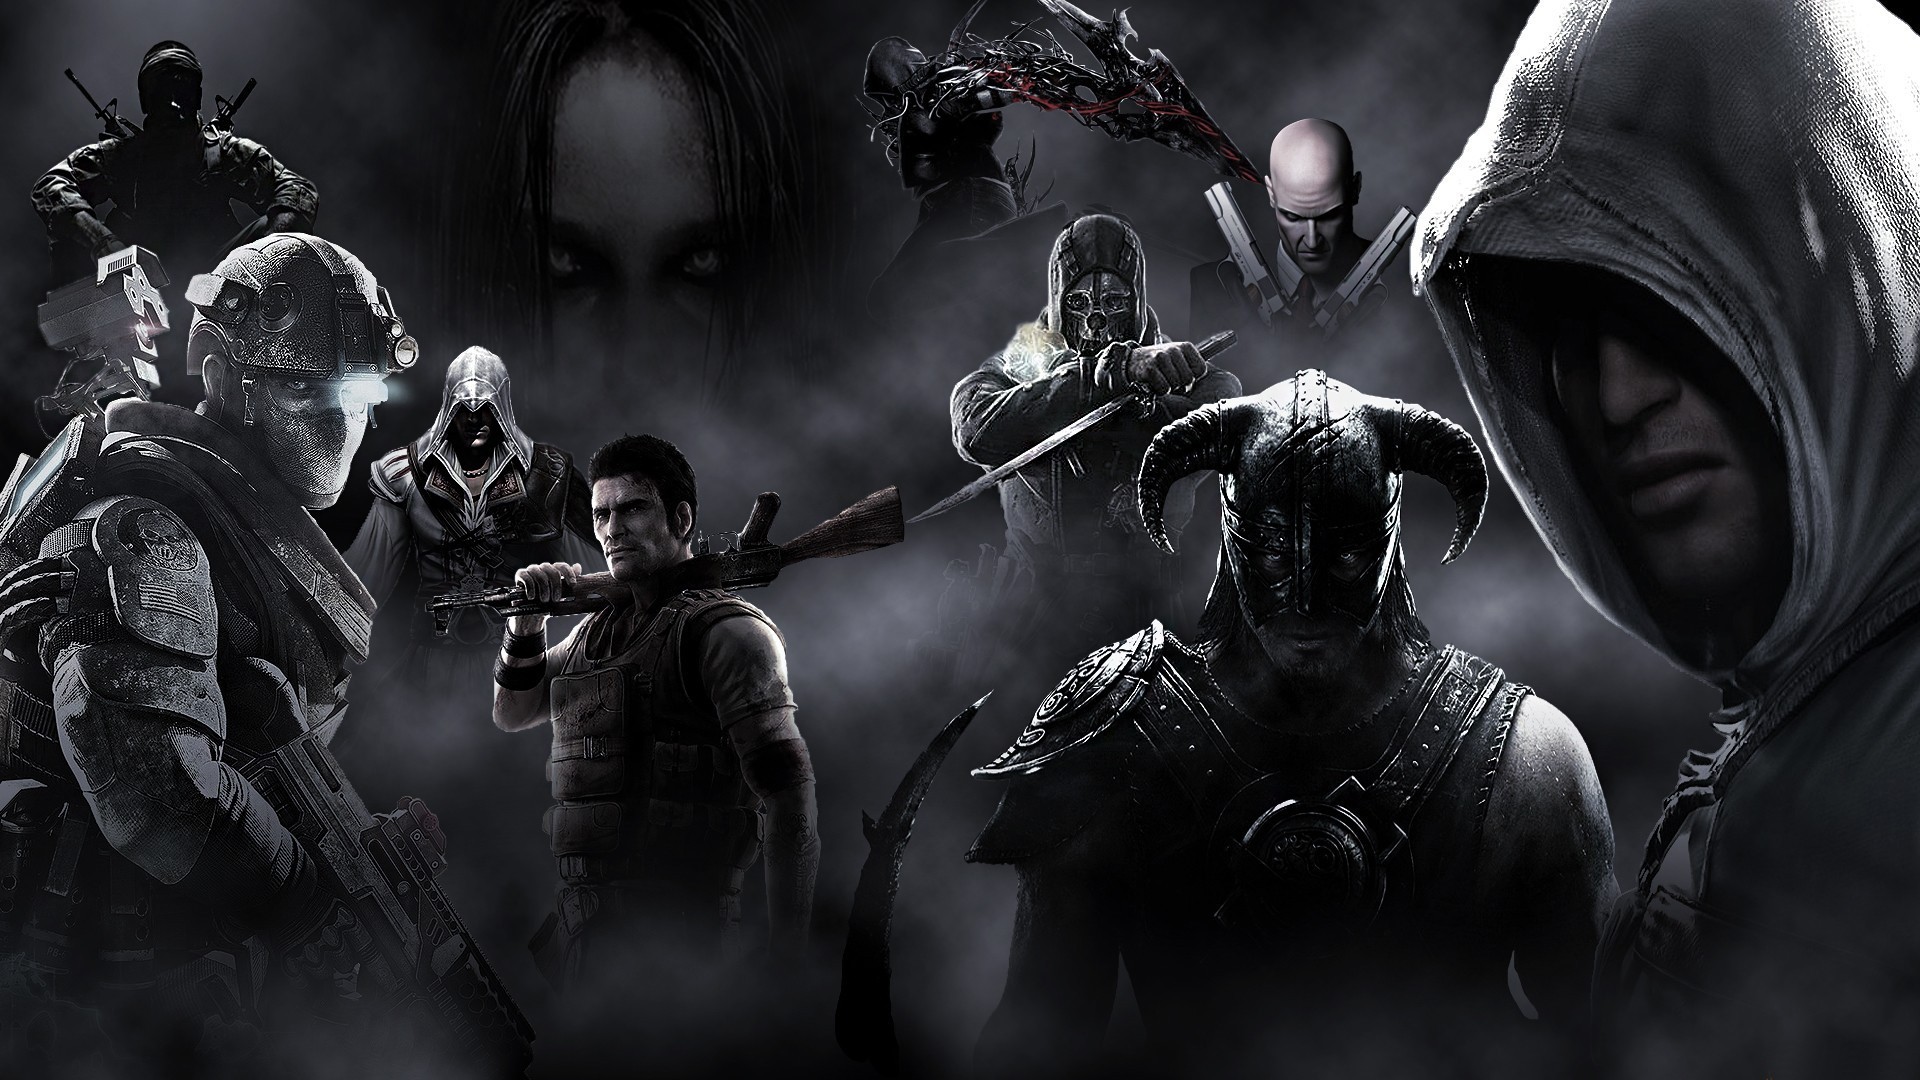 hitman, Assasins, Creed, Prototype, The, Elder, Scrolls, Skyrim, Dishonored, Dovahkiin, Ghost, Recon, Future, Soldier, Fear, Call, Of, Duty, Black, Ops Wallpaper